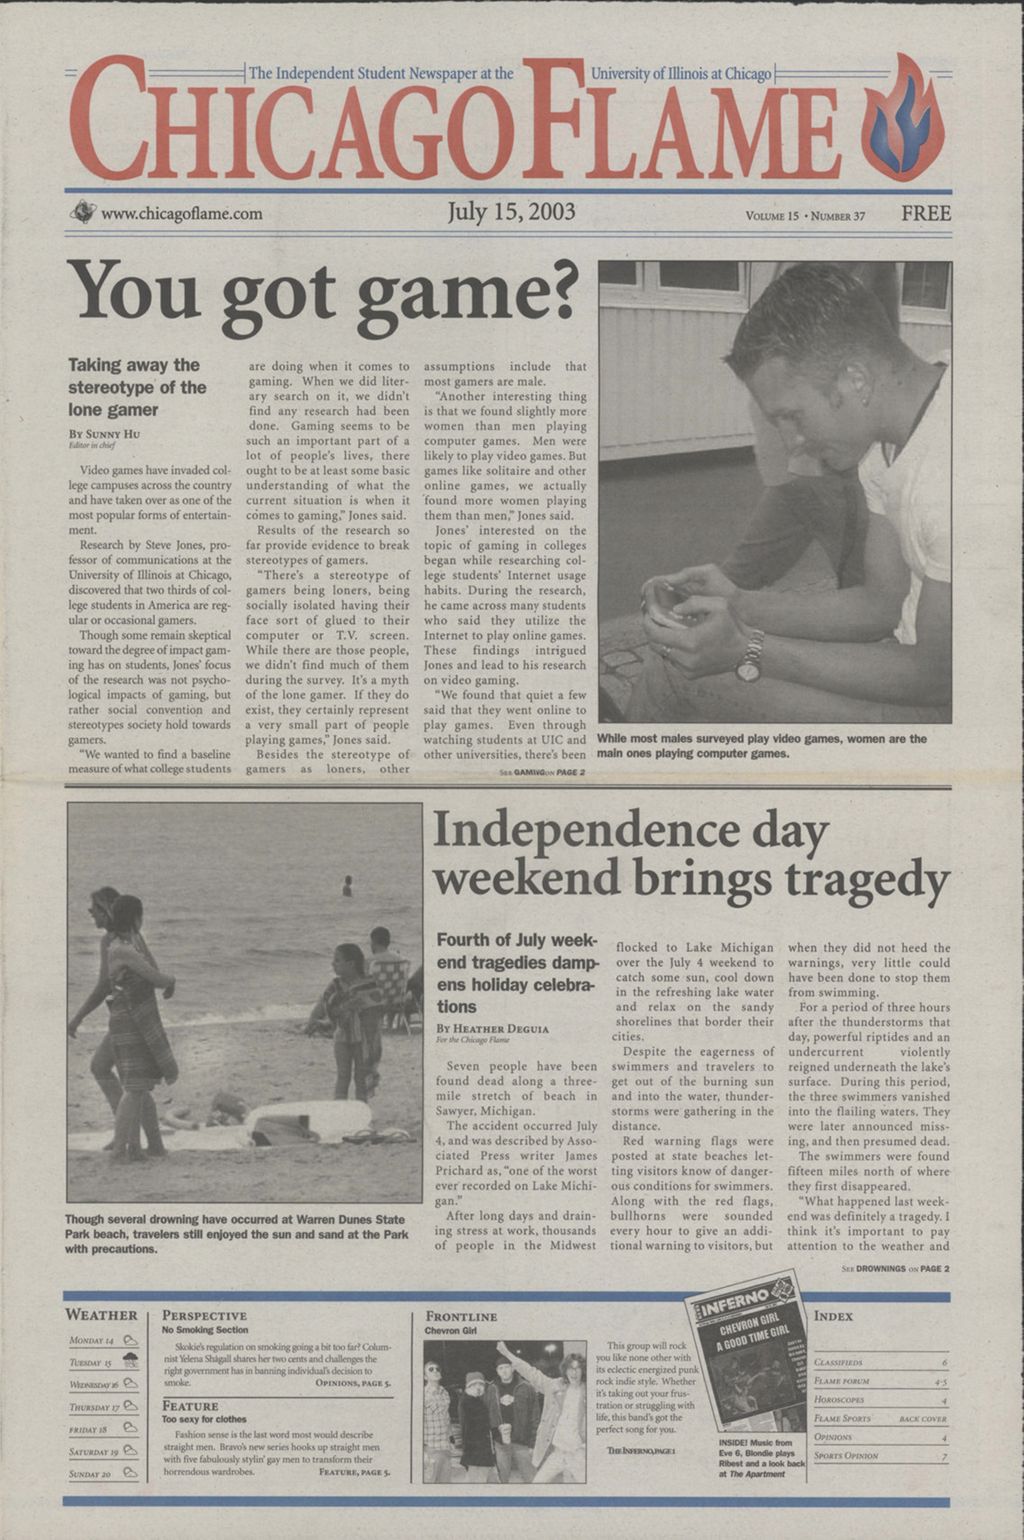 Chicago Flame (July 15, 2003)